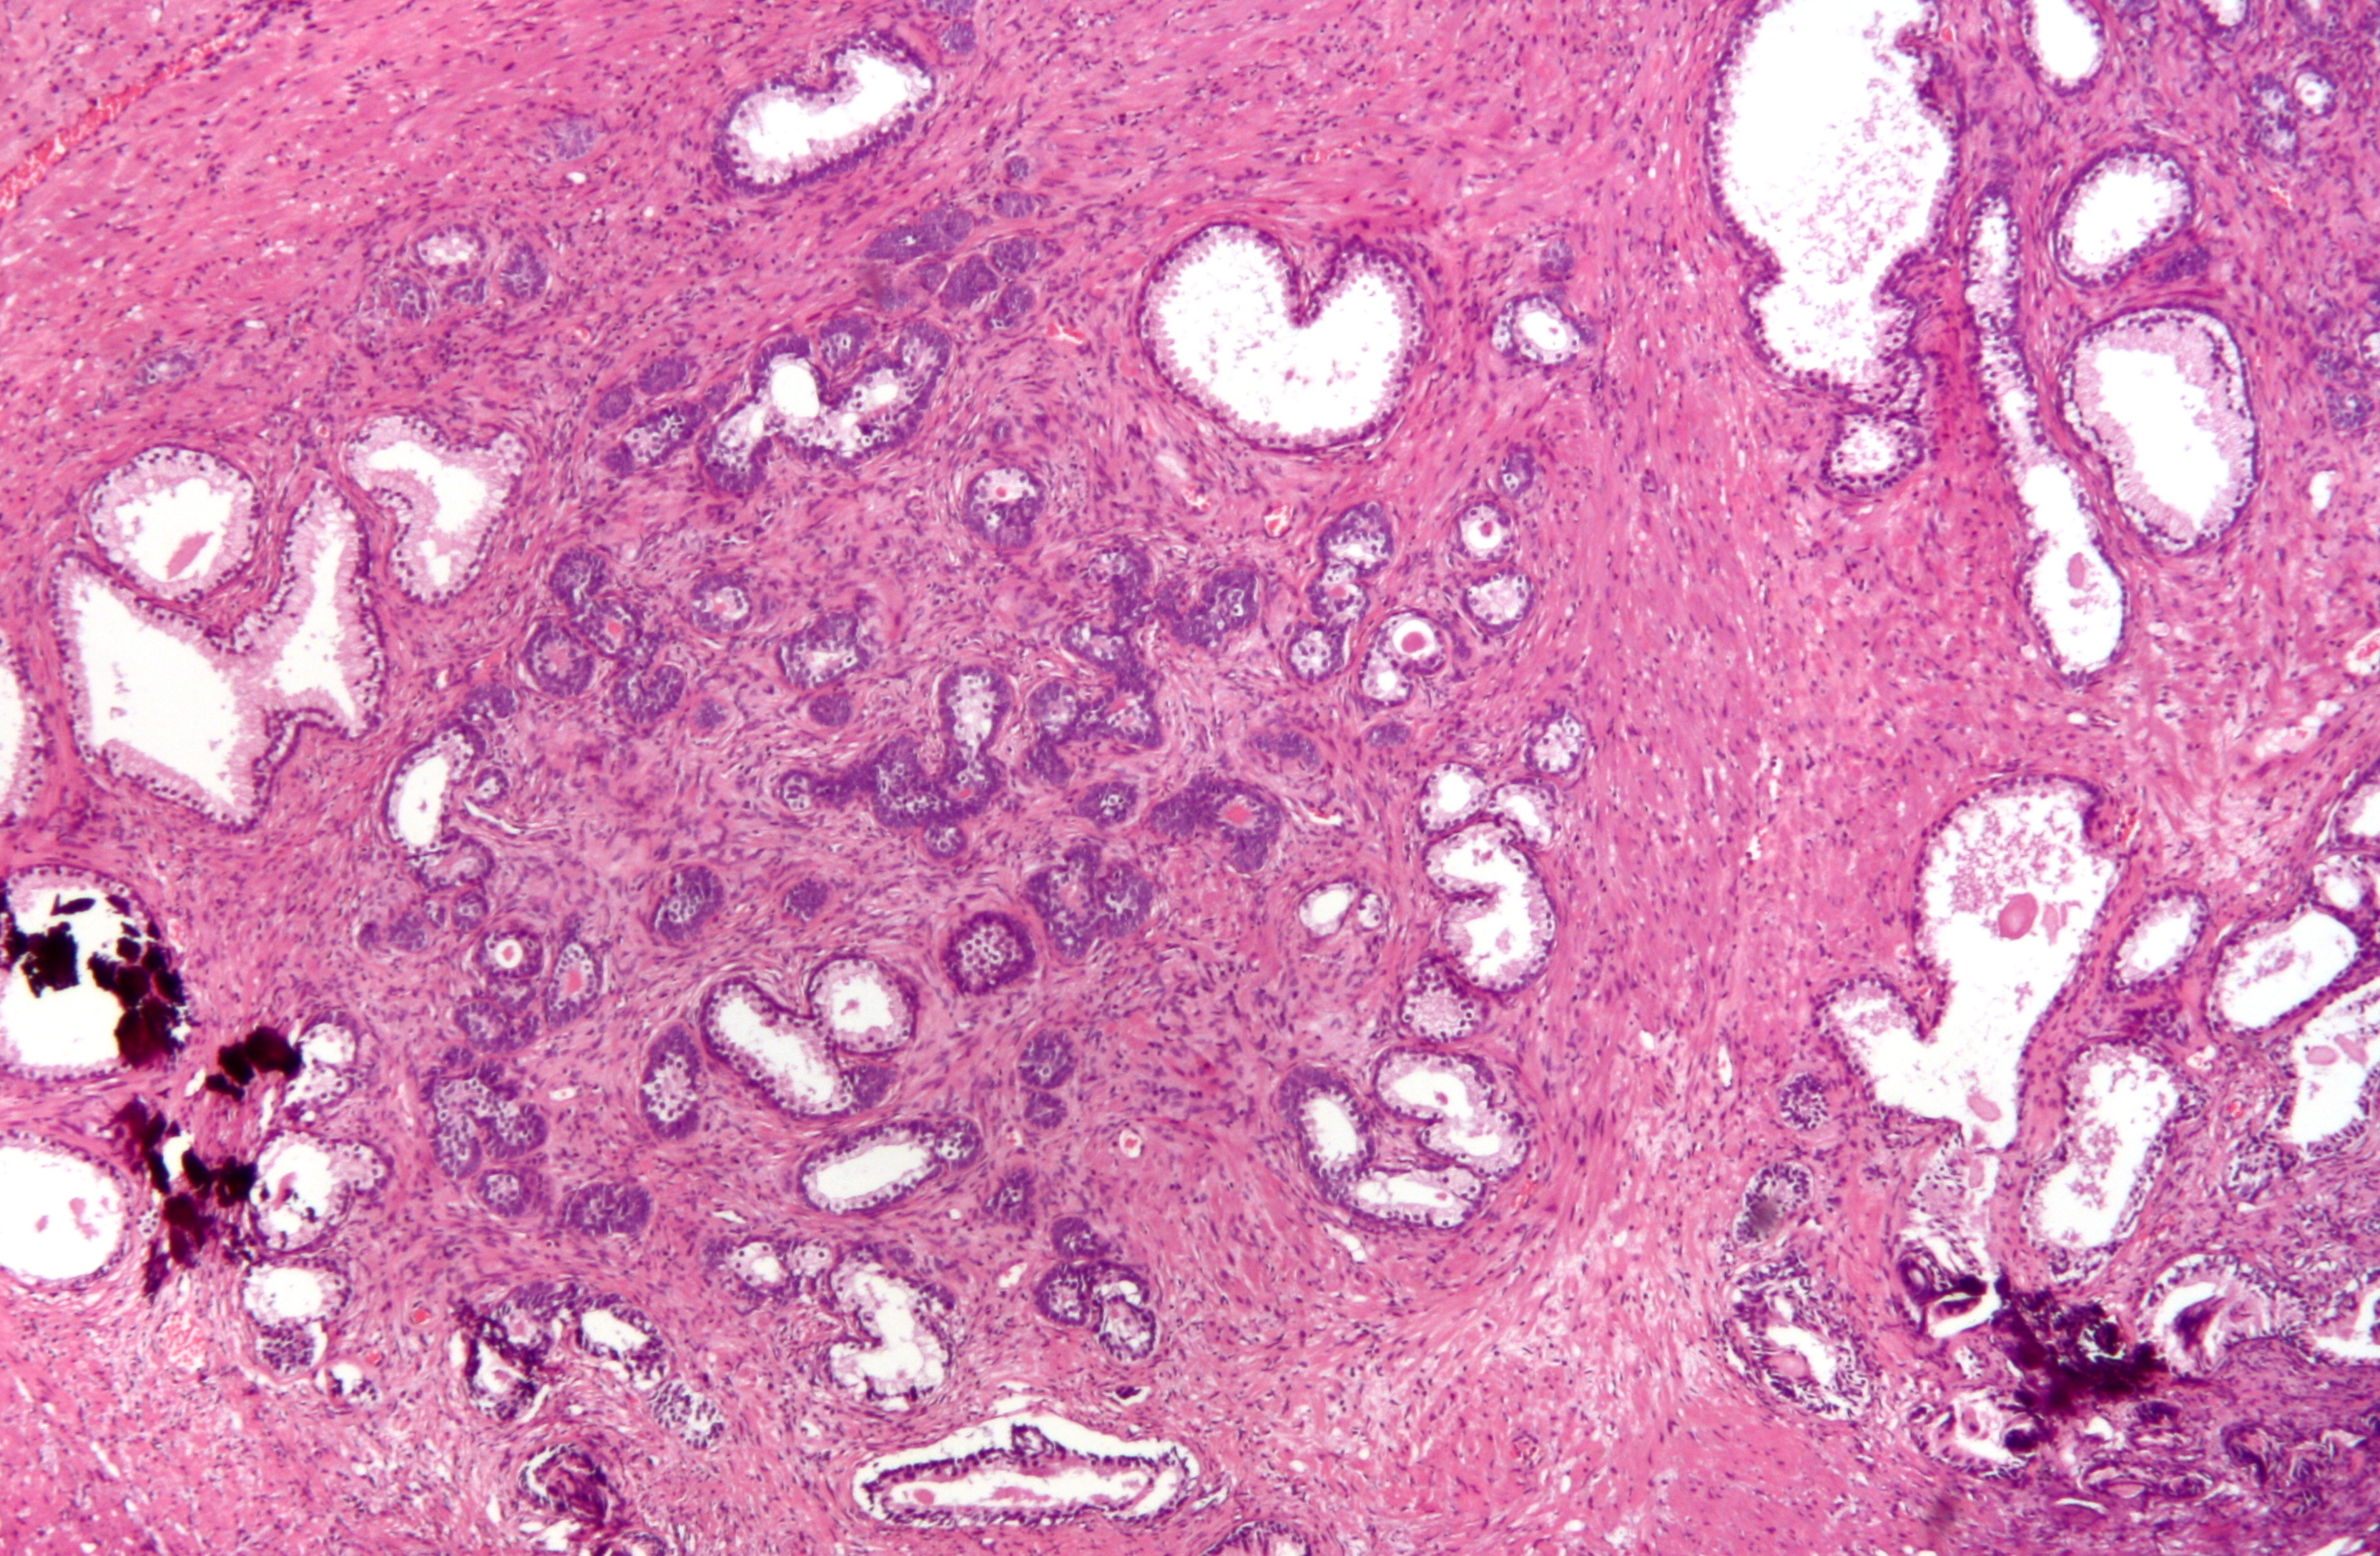 A papillary urothelial neoplasm